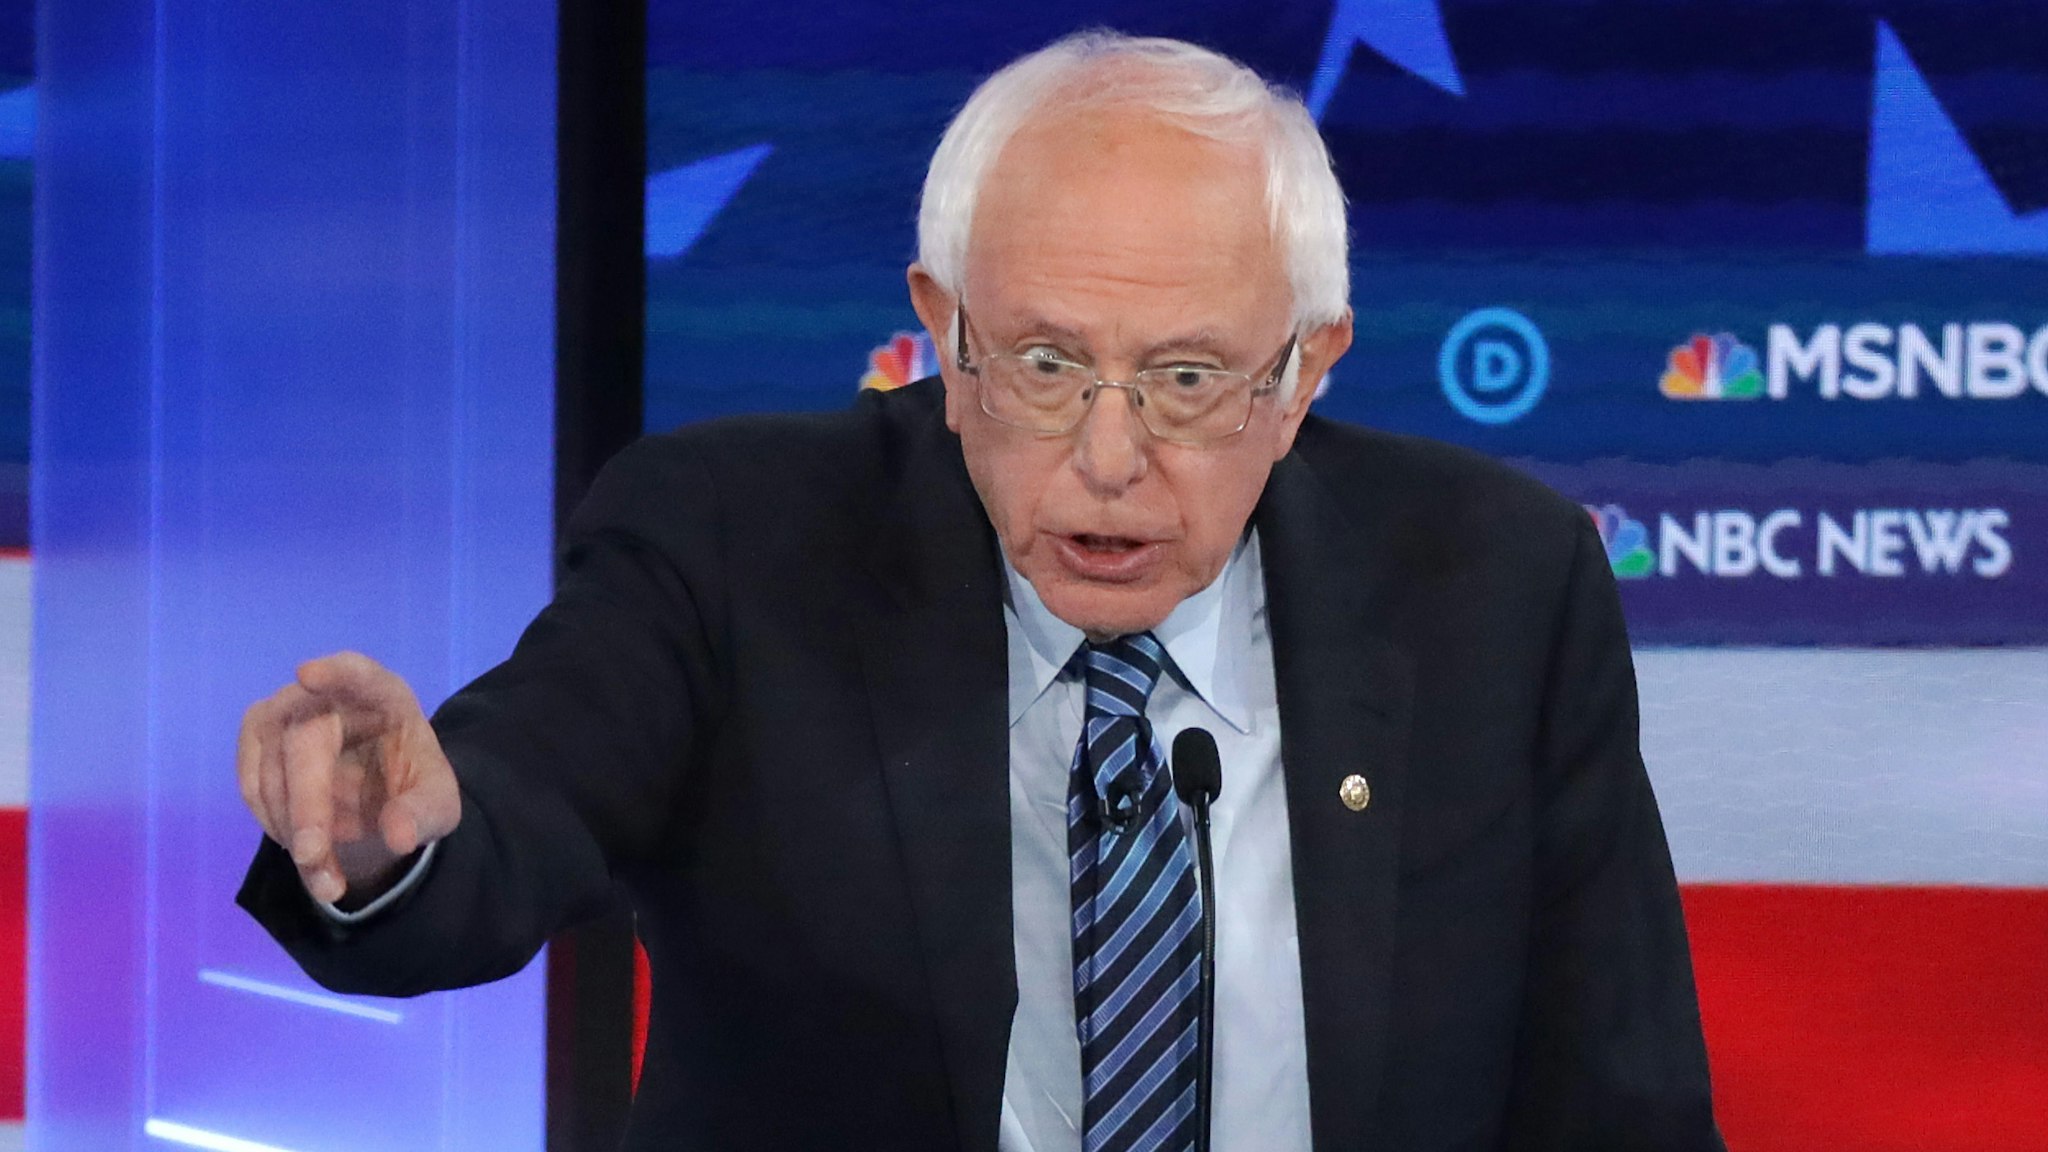 ATLANTA, GEORGIA - NOVEMBER 20: Democratic presidential candidate Sen. Bernie Sanders (I-VT) speaks during the Democratic Presidential Debate at Tyler Perry Studios November 20, 2019 in Atlanta, Georgia. Ten Democratic presidential hopefuls were chosen from the larger field of candidates to participate in the debate hosted by MSNBC and The Washington Post.